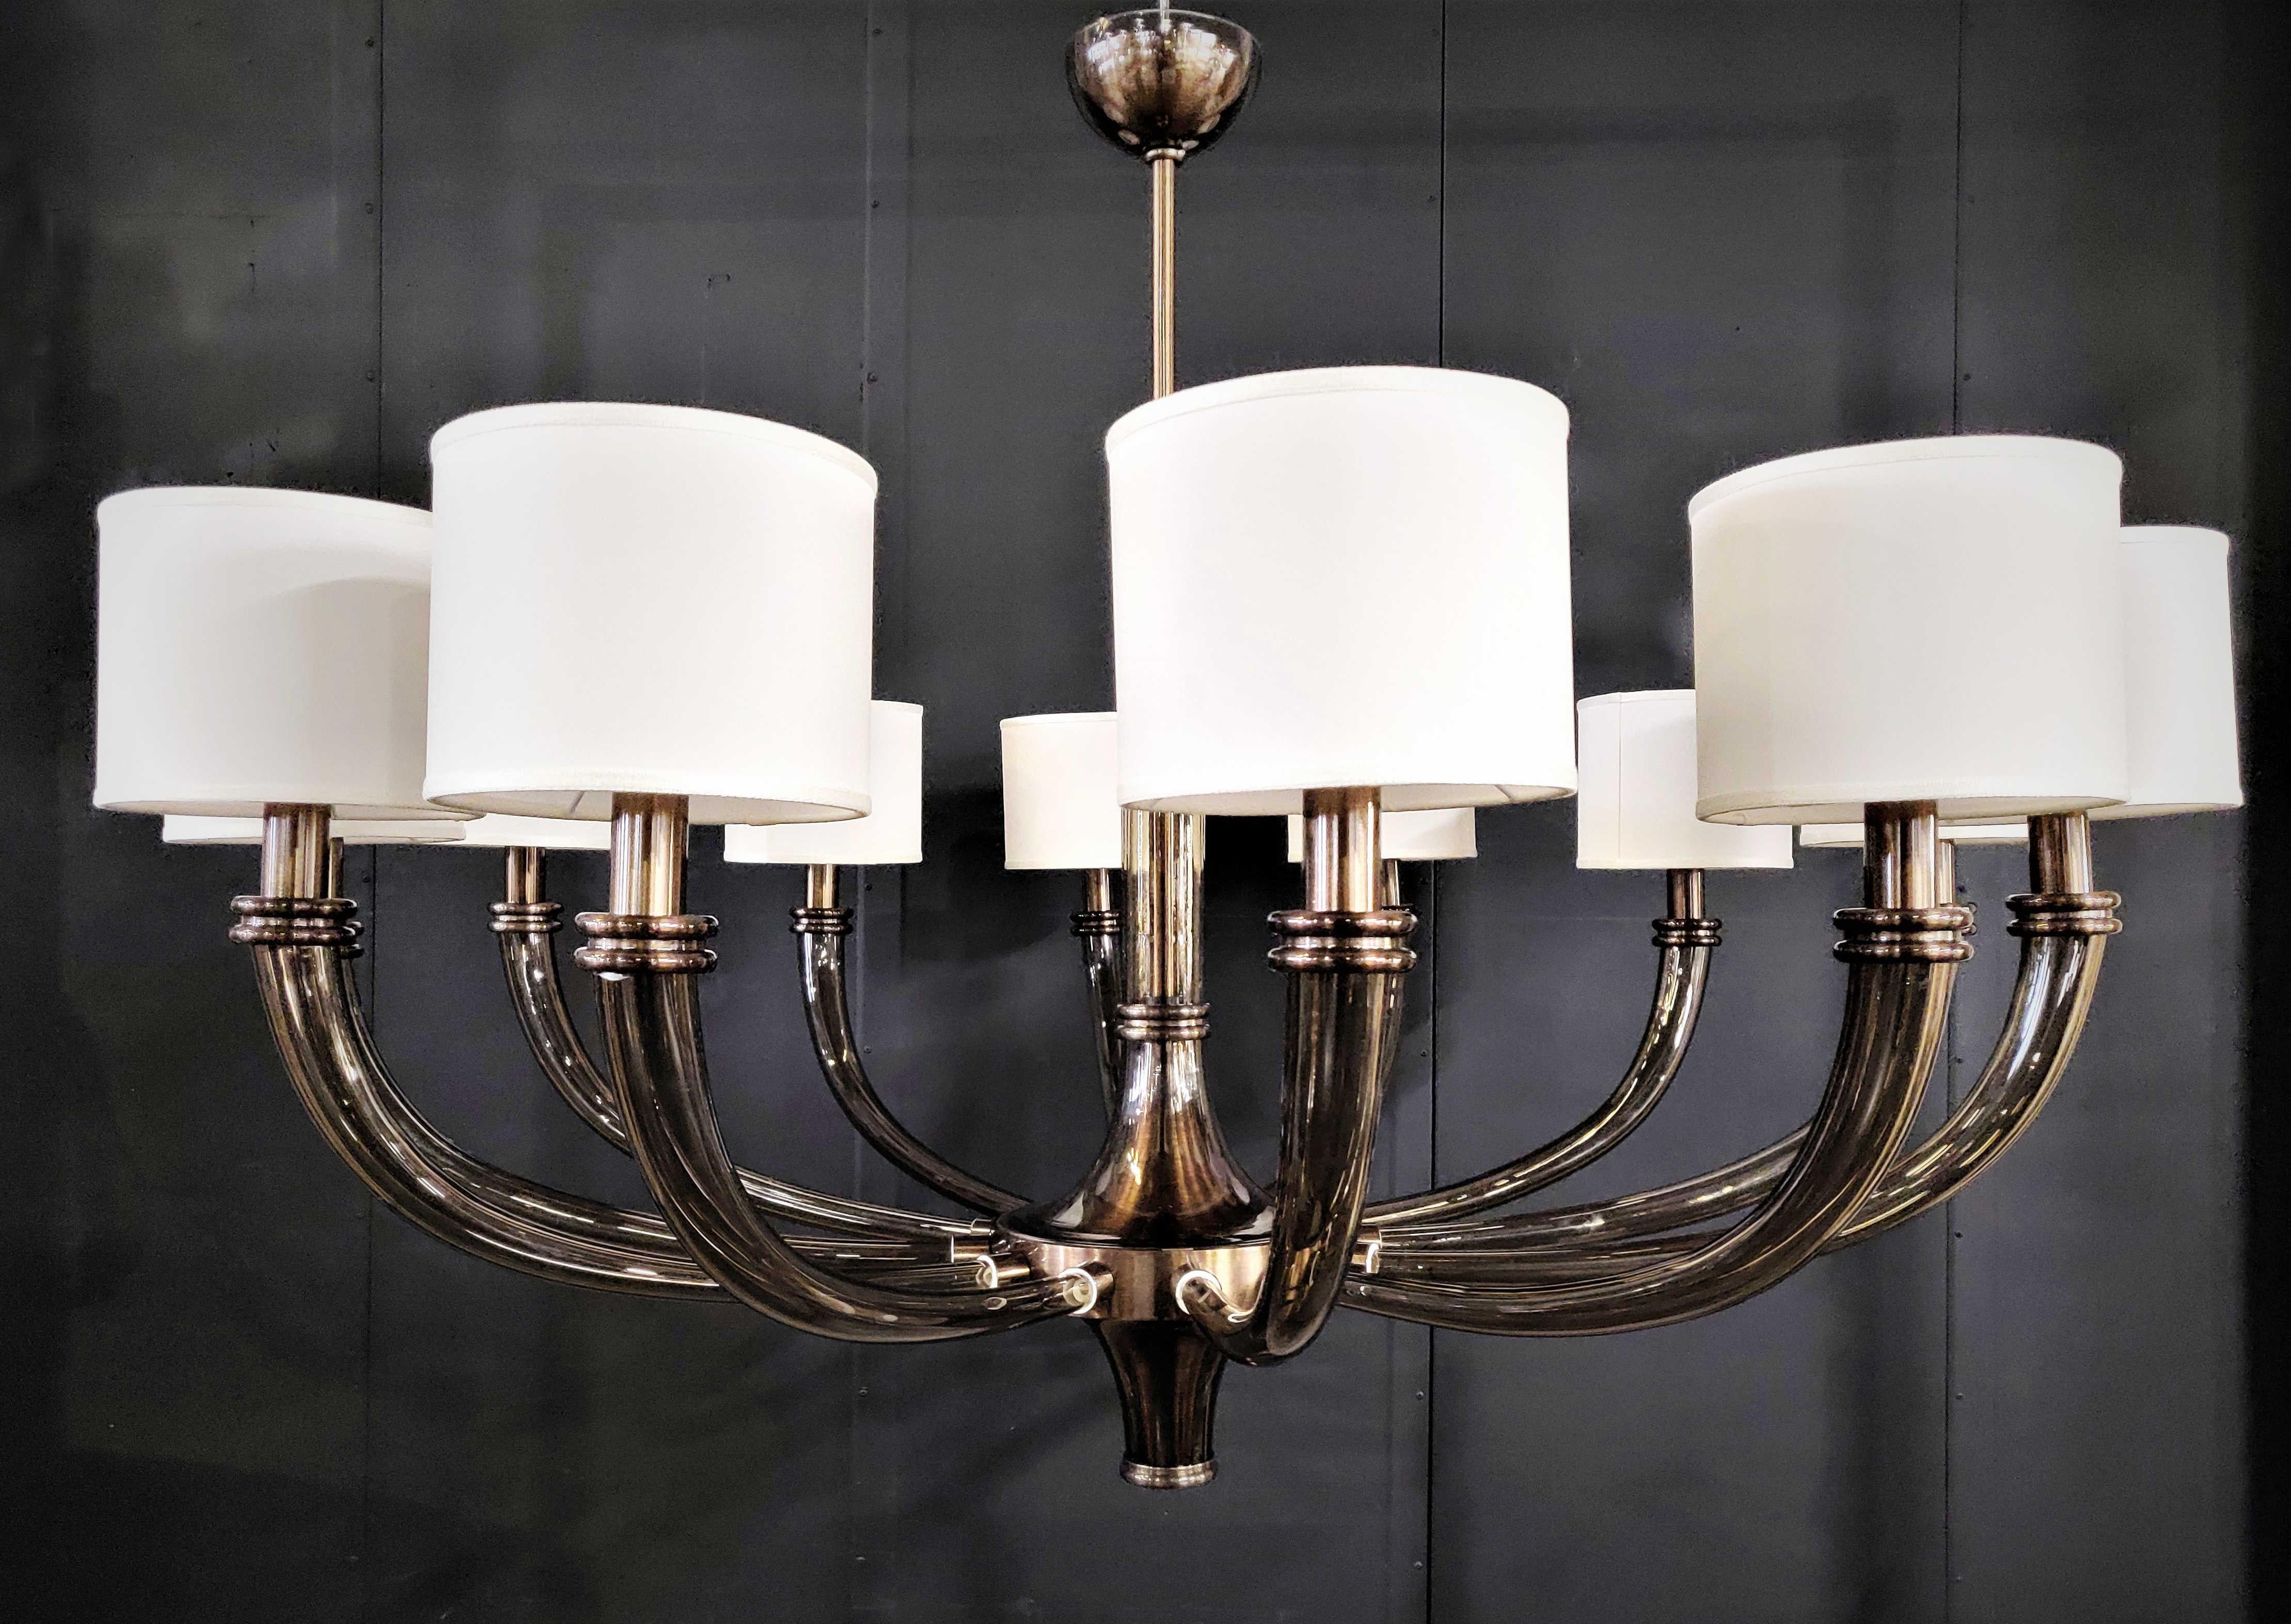 Italian 12-arm Venetian chandelier with smoky brown Murano glass in oil rubbed bronze finish and fabric shades / Made in Italy
12 lights / E26 or E27 type / max 60W each
Measures: Diameter: 51 inches / Height: 36 inches 
Order only / This item ships